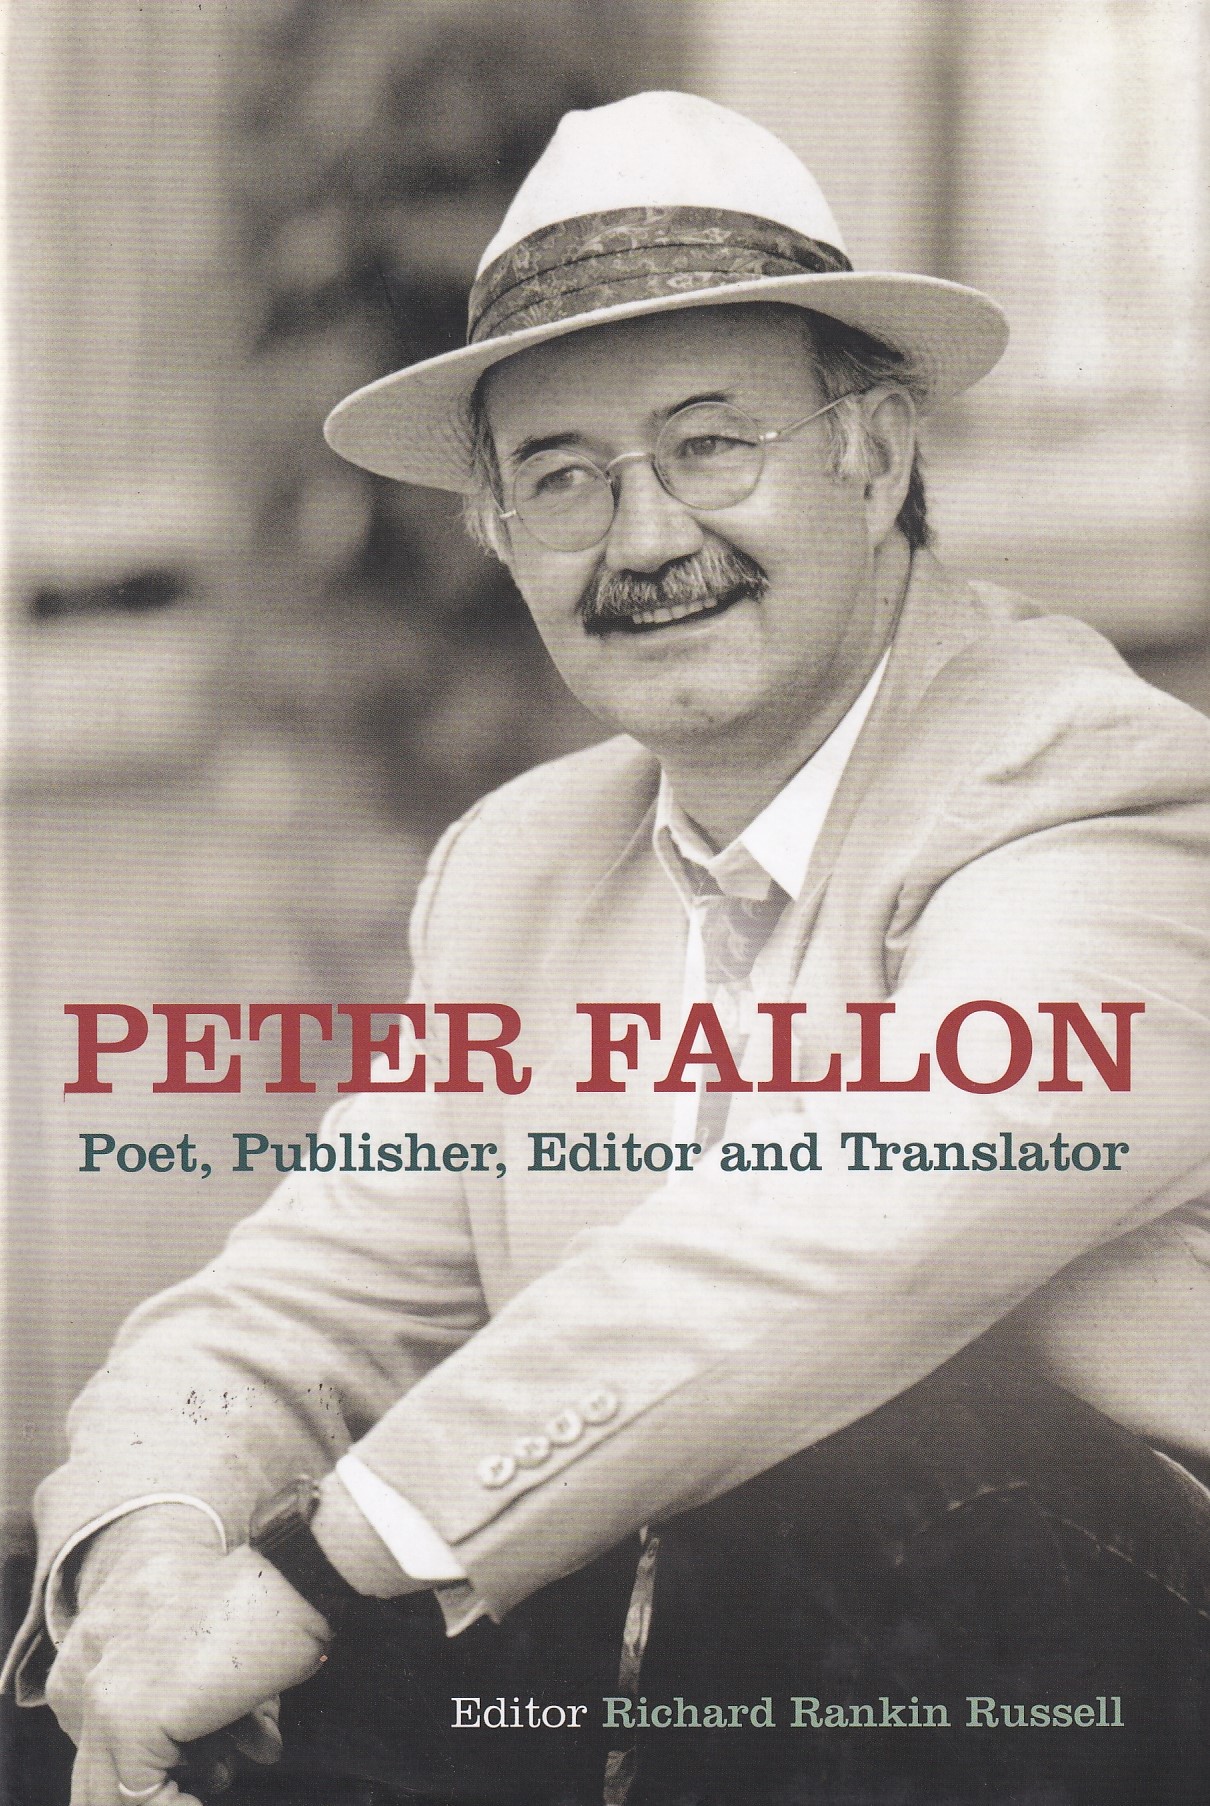 Peter Fallon: Poet, Publisher, Editor and Translator by Richard Rankin Russell (Ed.)